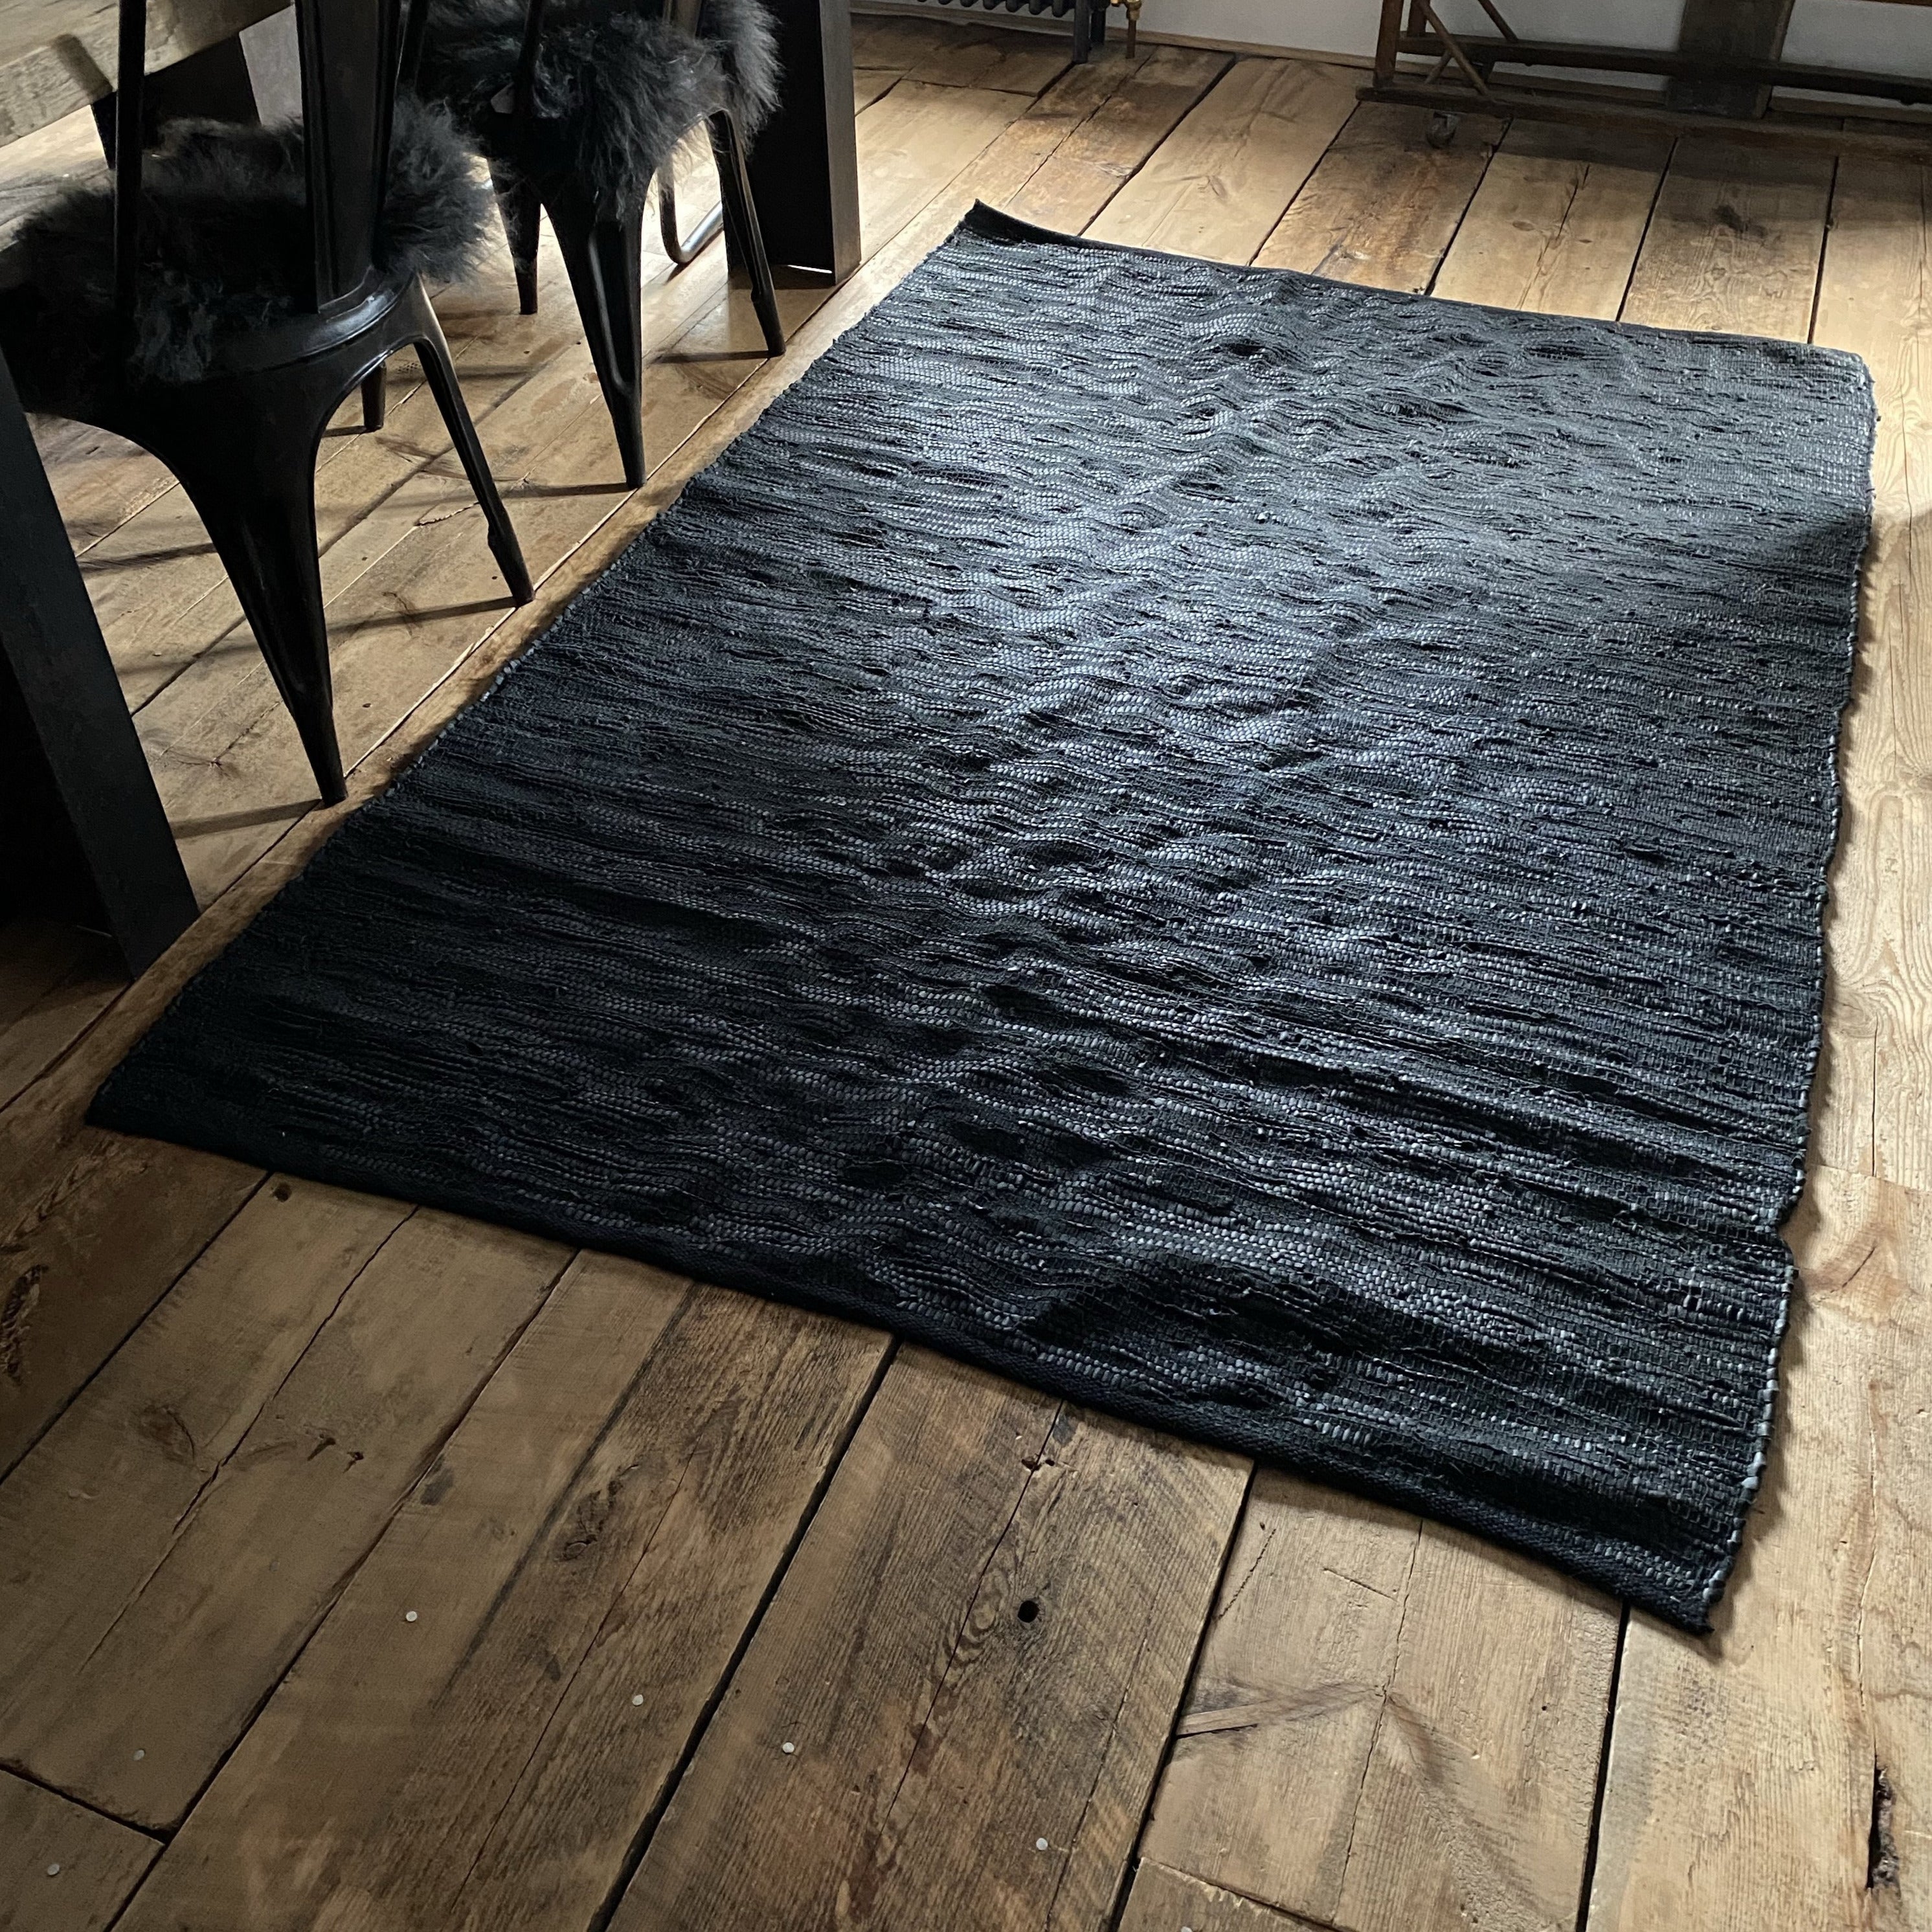 Muubs Black Leather Woven Rug